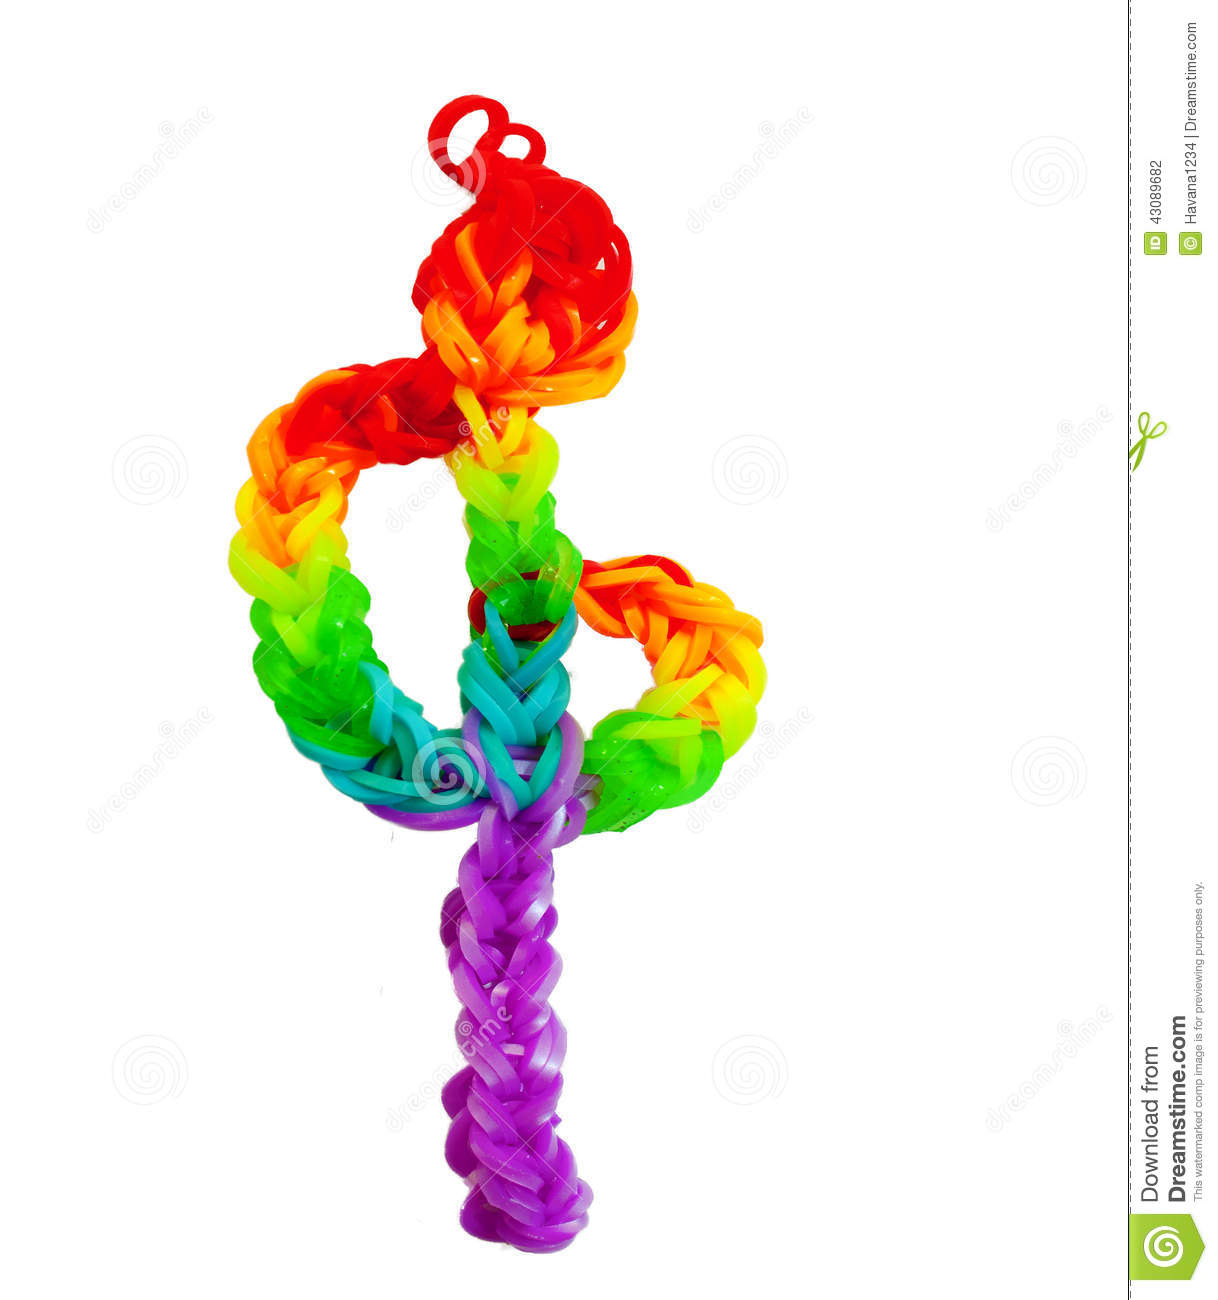 Treble Clef Made Of Colorful Rainbow Loom Rubber Bands  Stock Photo    